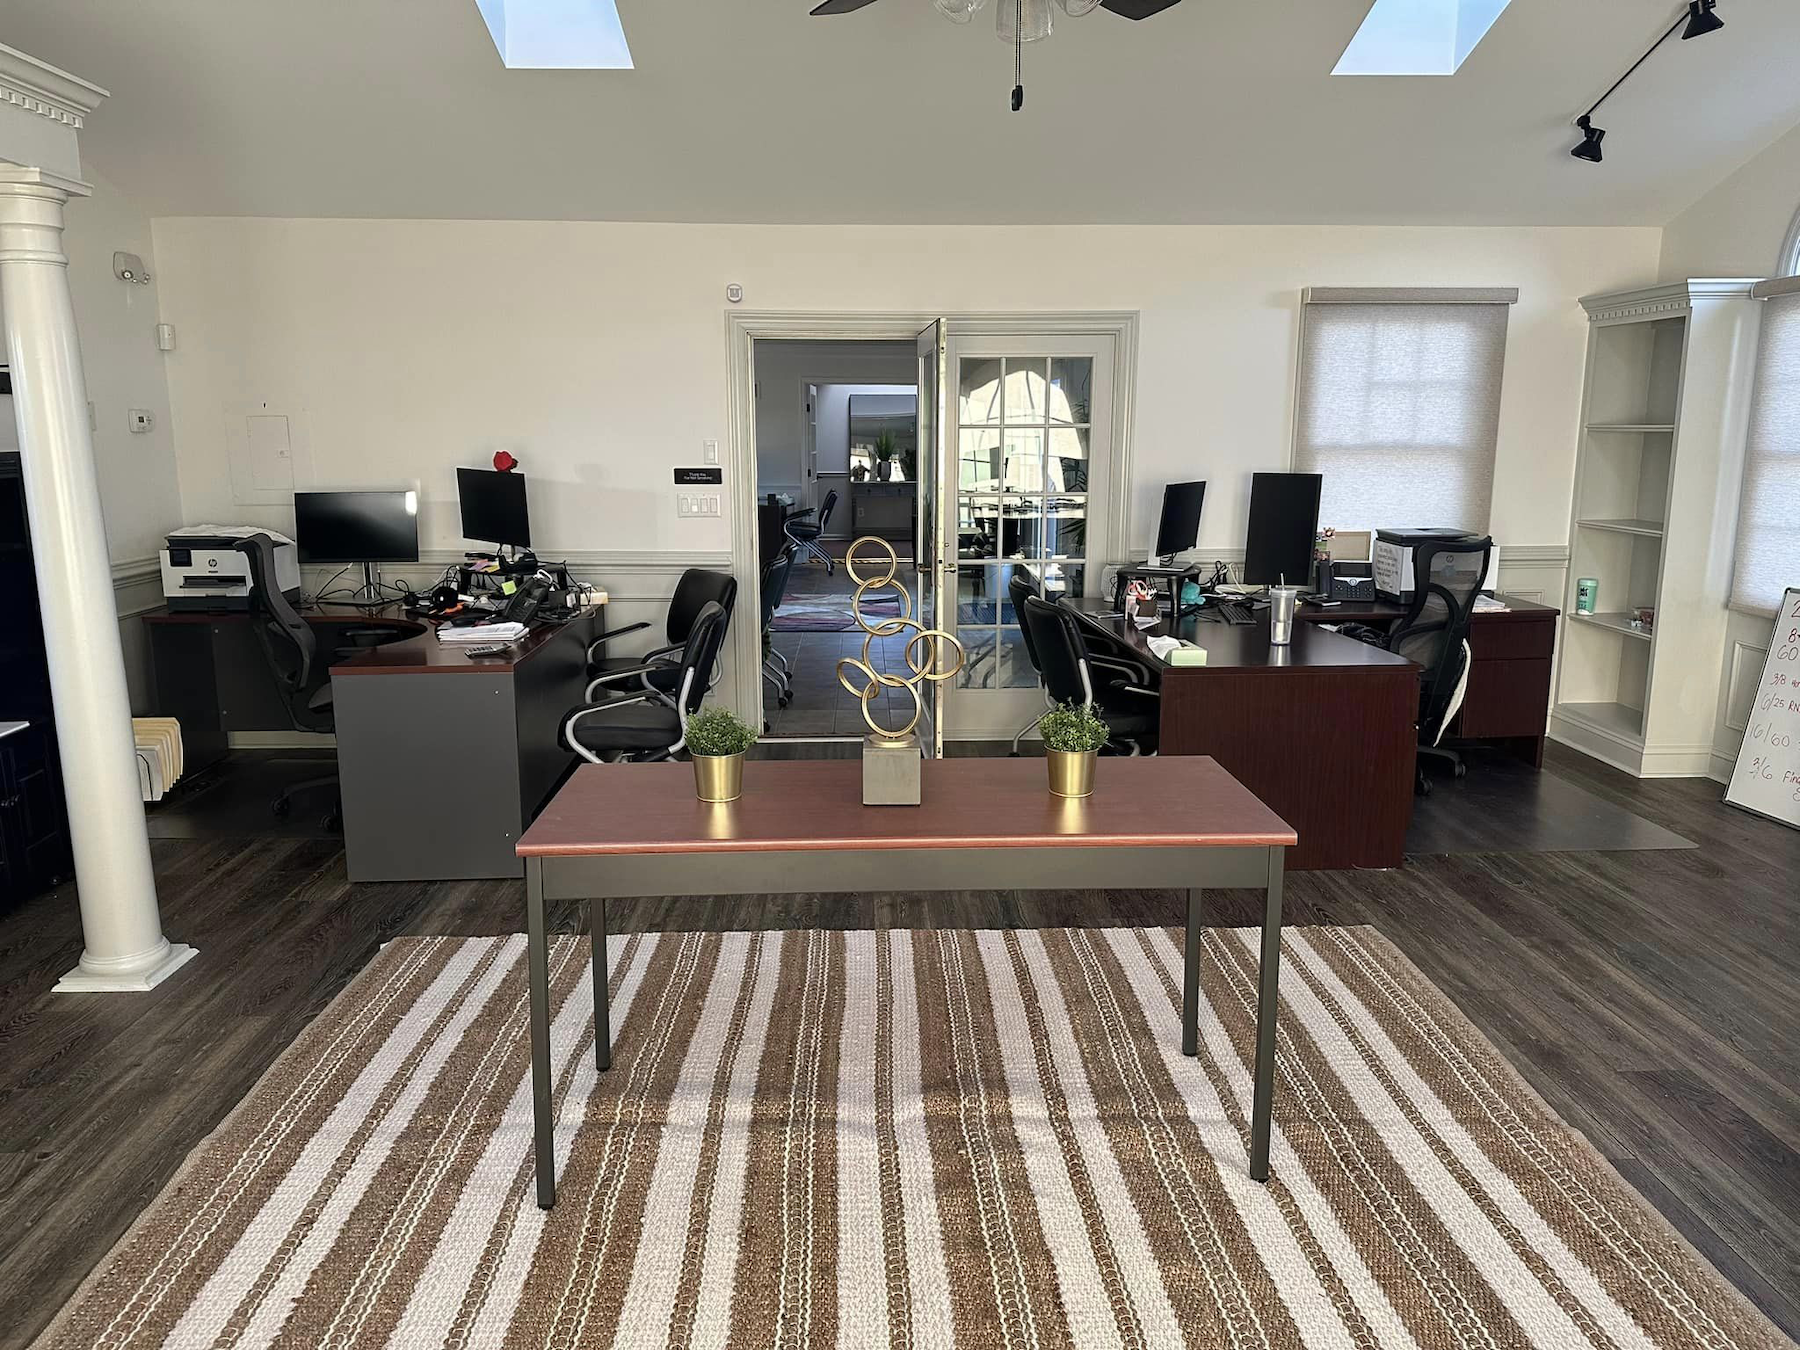 The Matt Gardner State Farm White Marsh location had a smooth grand opening on Friday, March 1st! Give our office a call for any of your insurance and financial services needs!